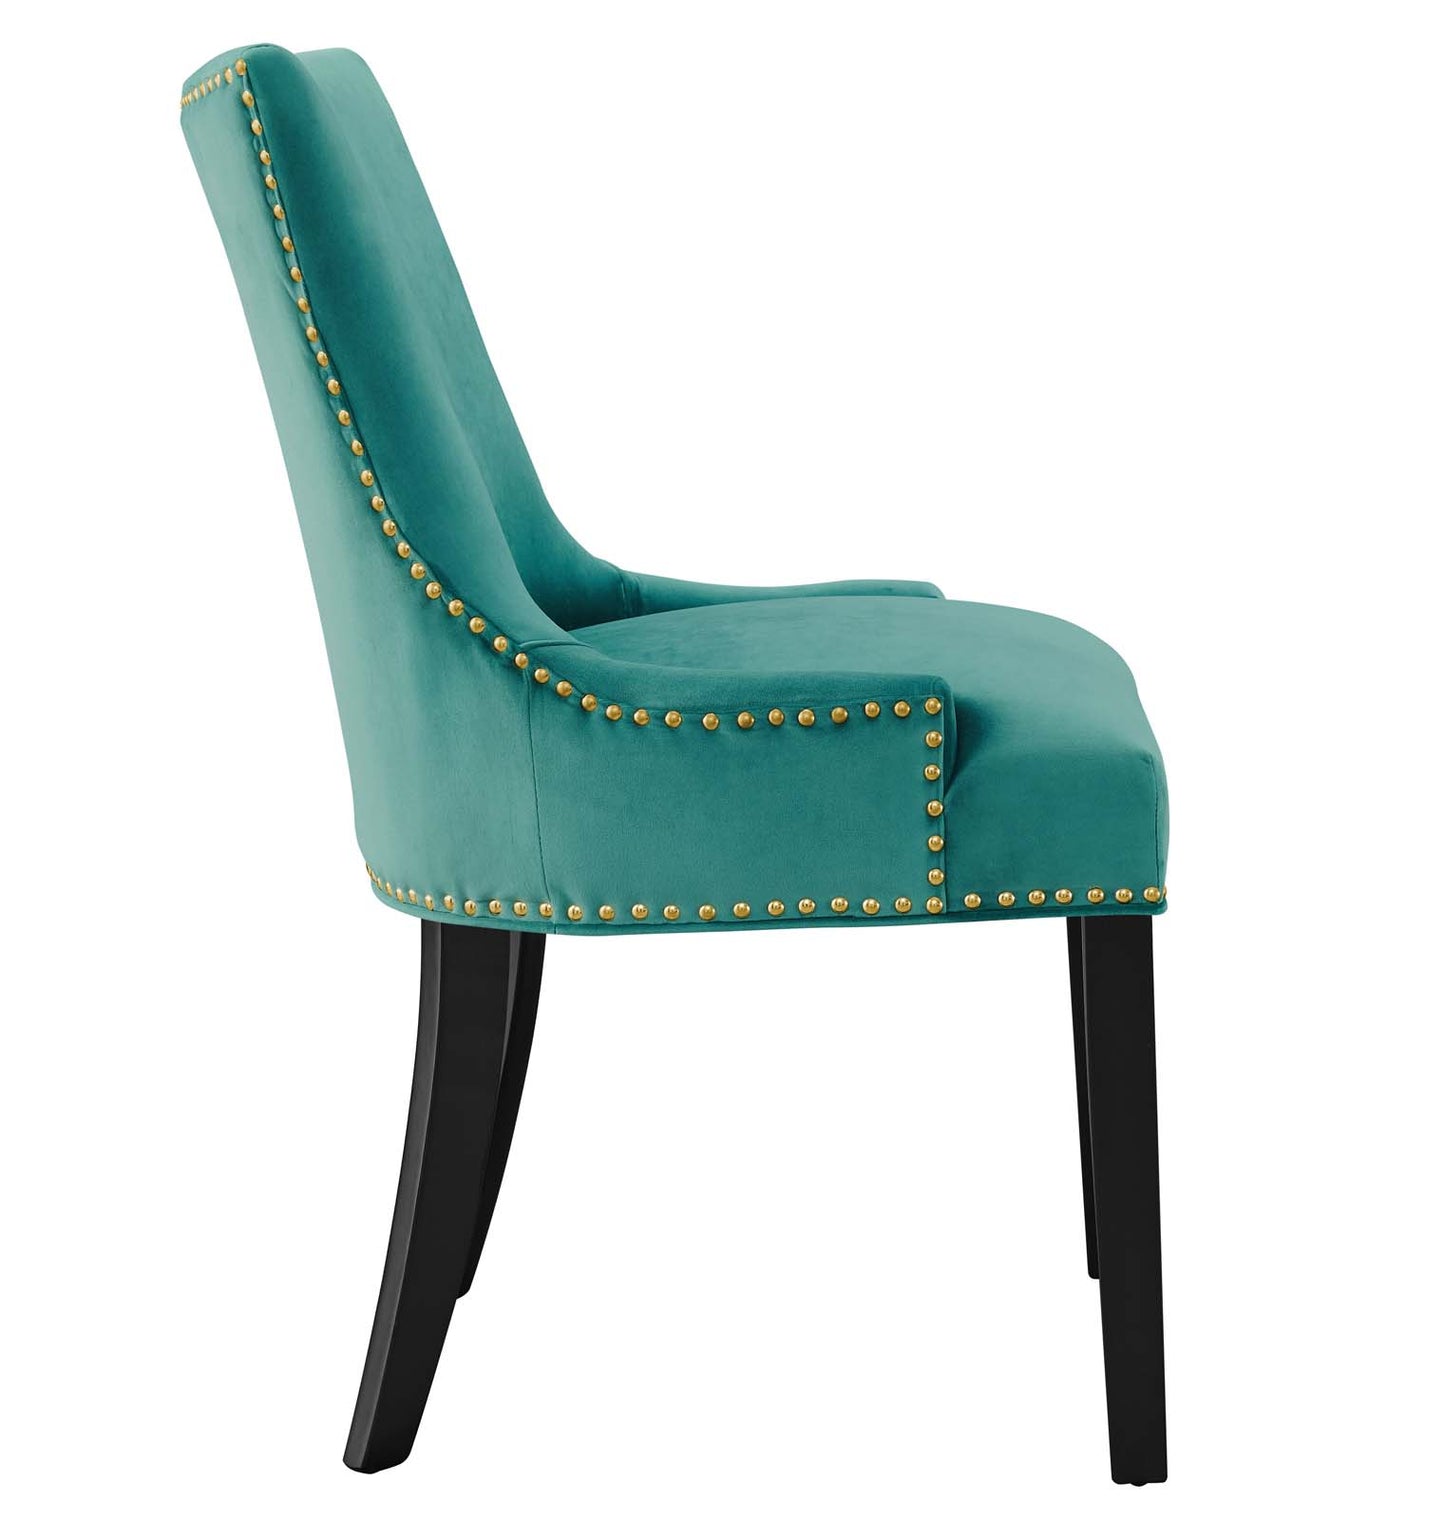 Marquis Performance Velvet Dining Chairs - Set of 2 Teal EEI-5010-TEA